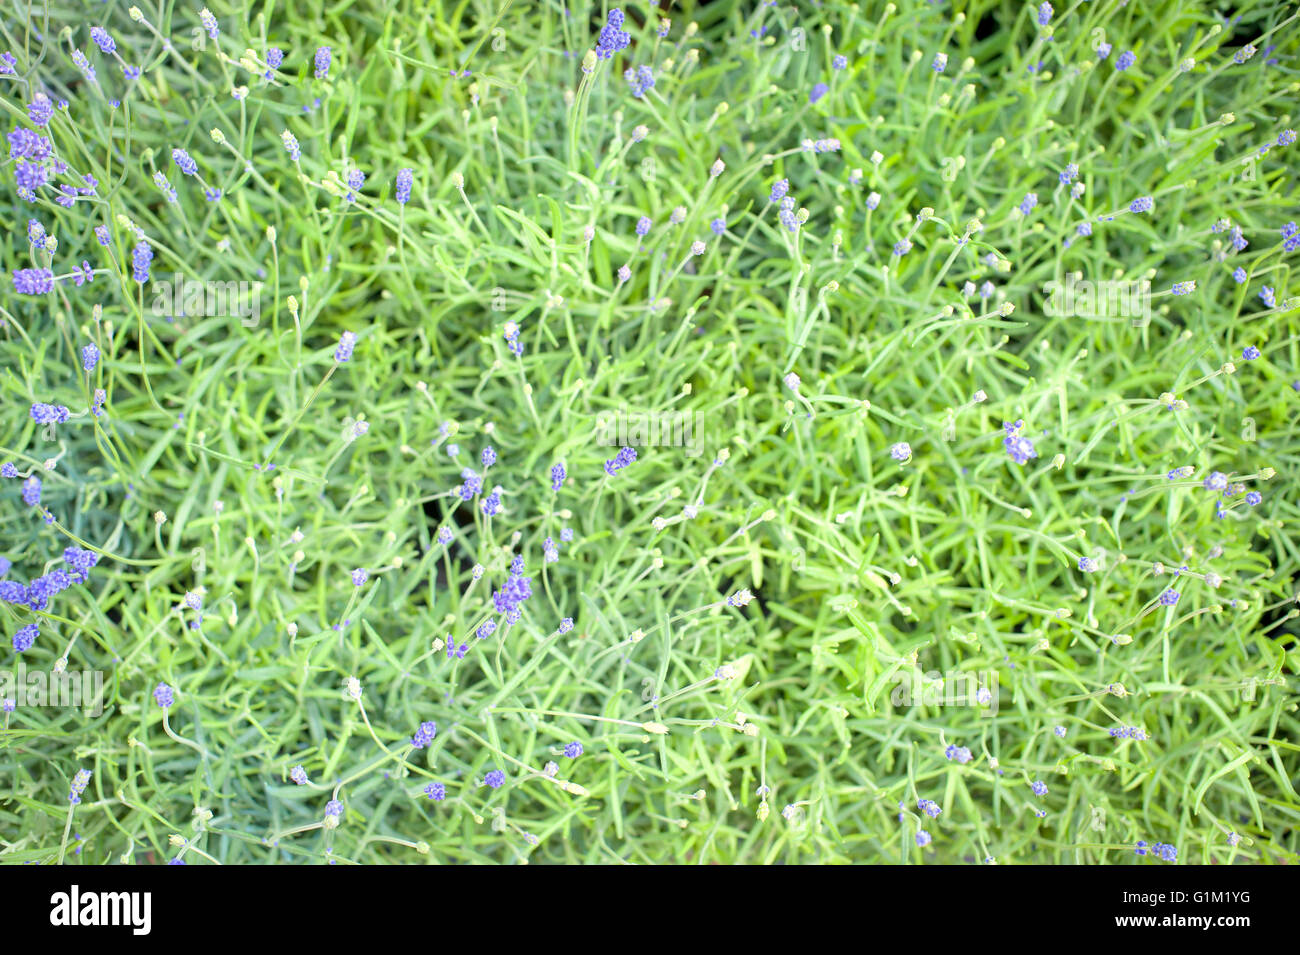 Lavender bush green with purple flowers closeup in selective focus Stock Photo